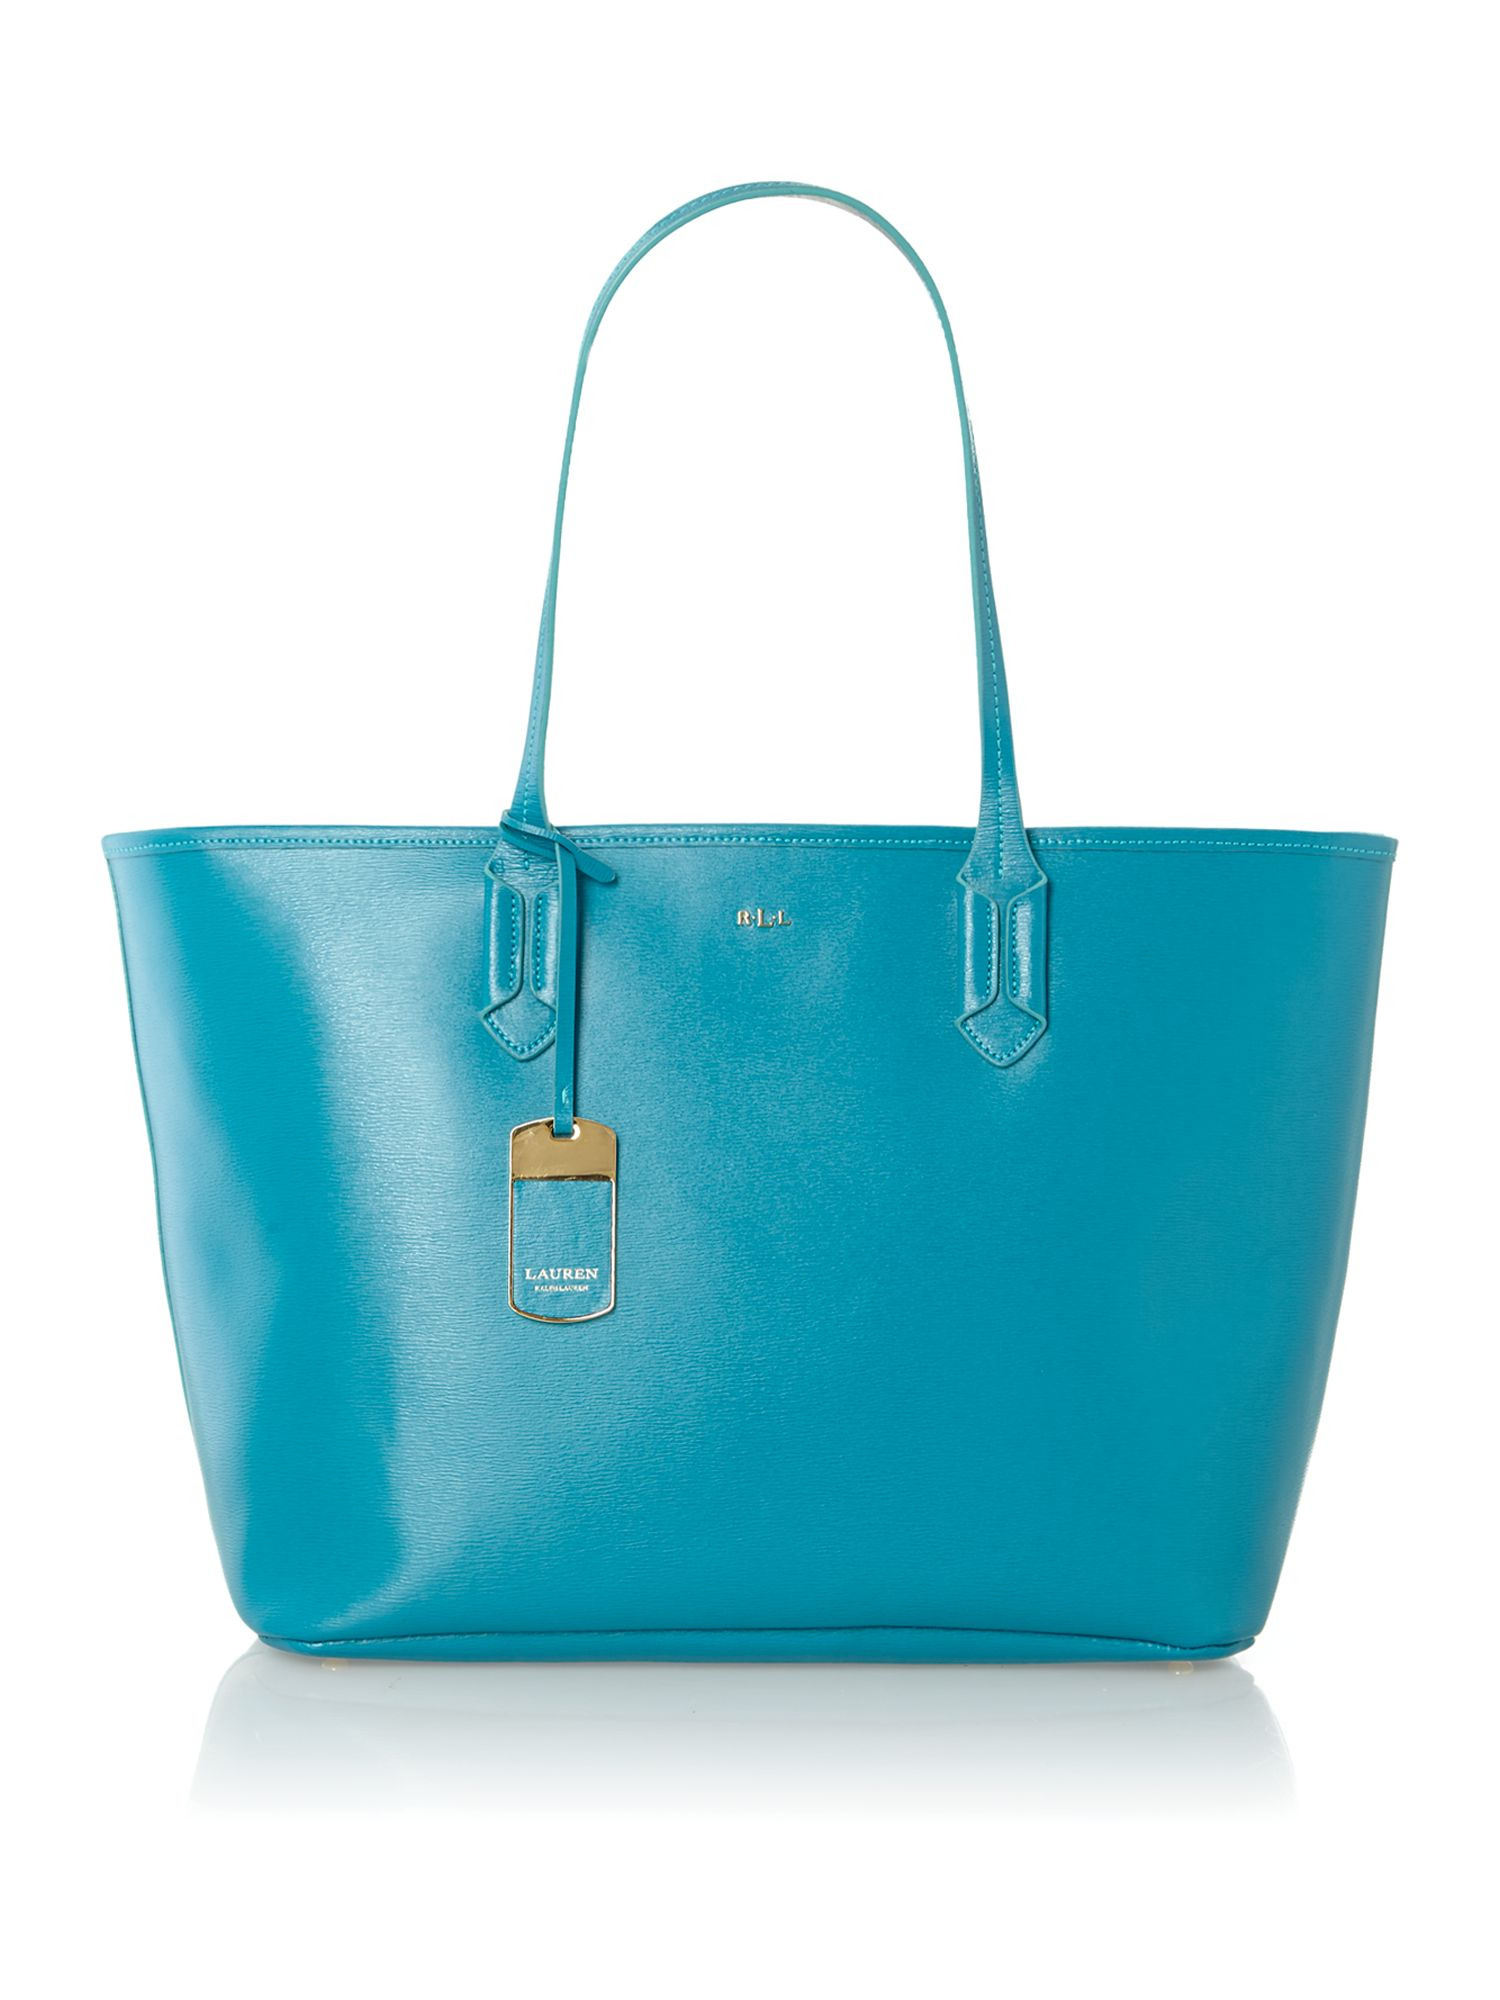 Lauren By Ralph Lauren Tate Blue Large Tote Bag in Blue | Lyst